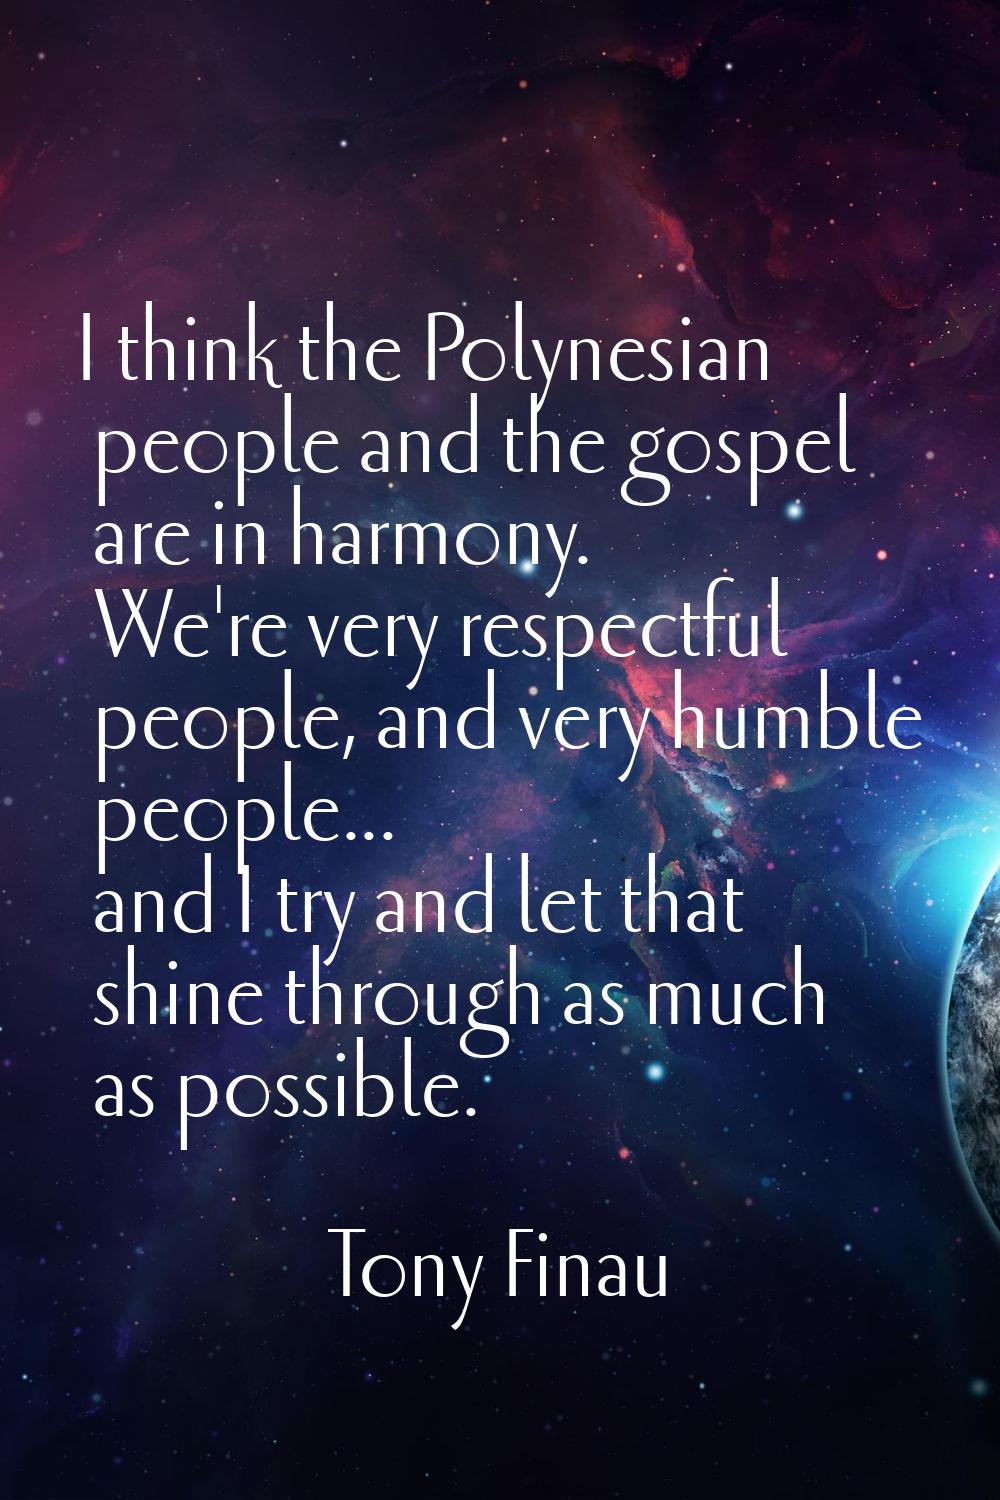 I think the Polynesian people and the gospel are in harmony. We're very respectful people, and very